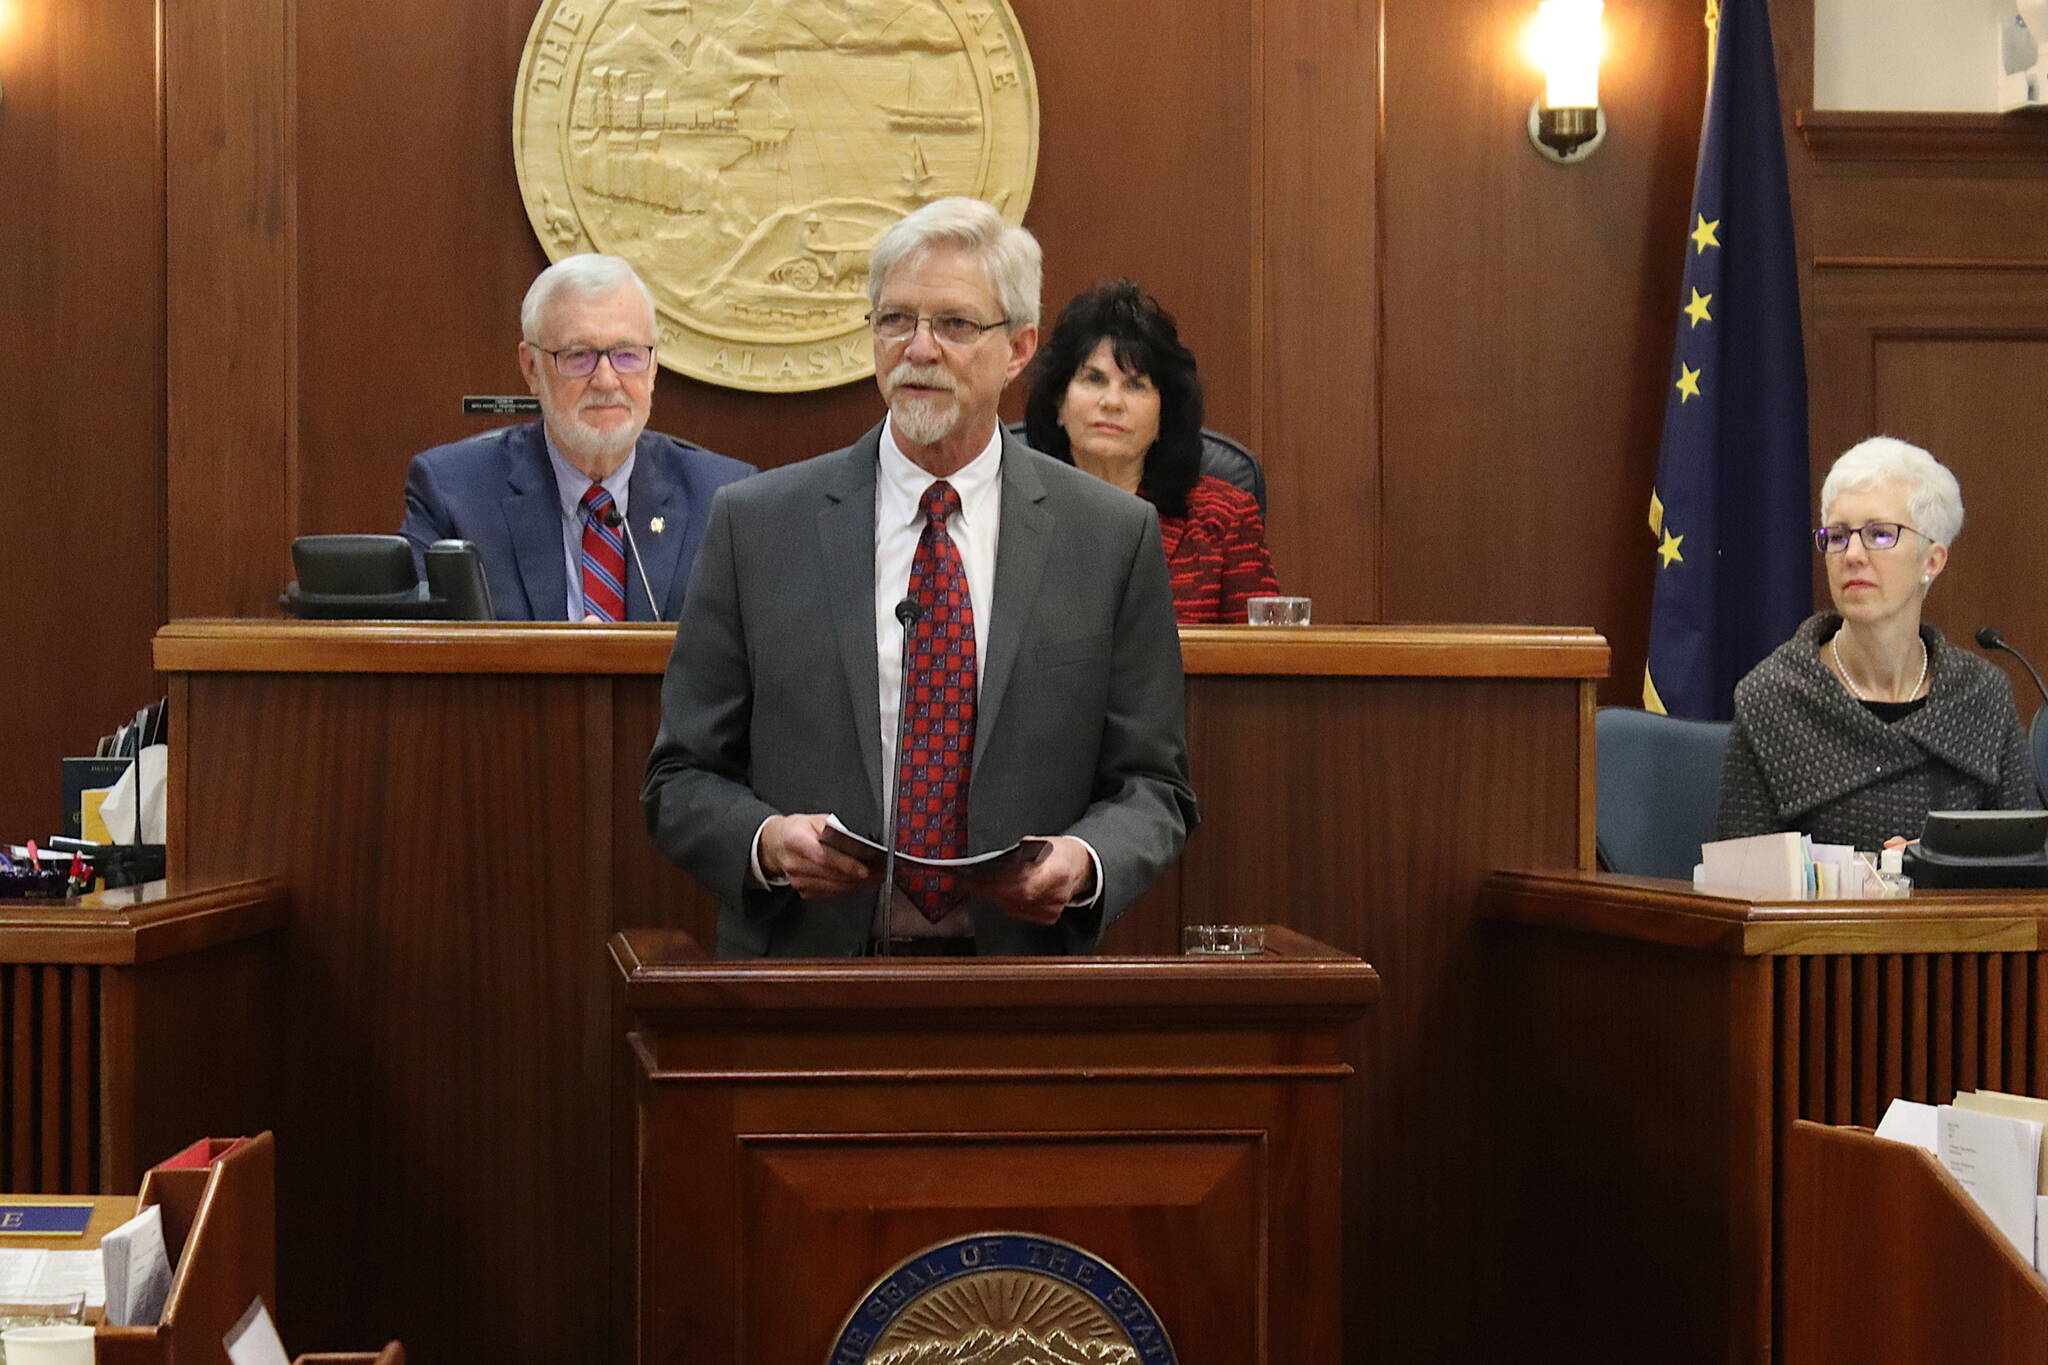 Alaska Chief Justice Peter J. Maassen delivers his first State of the Judiciary address to a joint session of the Alaska Legislature on Wednesday. (Mark Sabbatini / Juneau Empire)